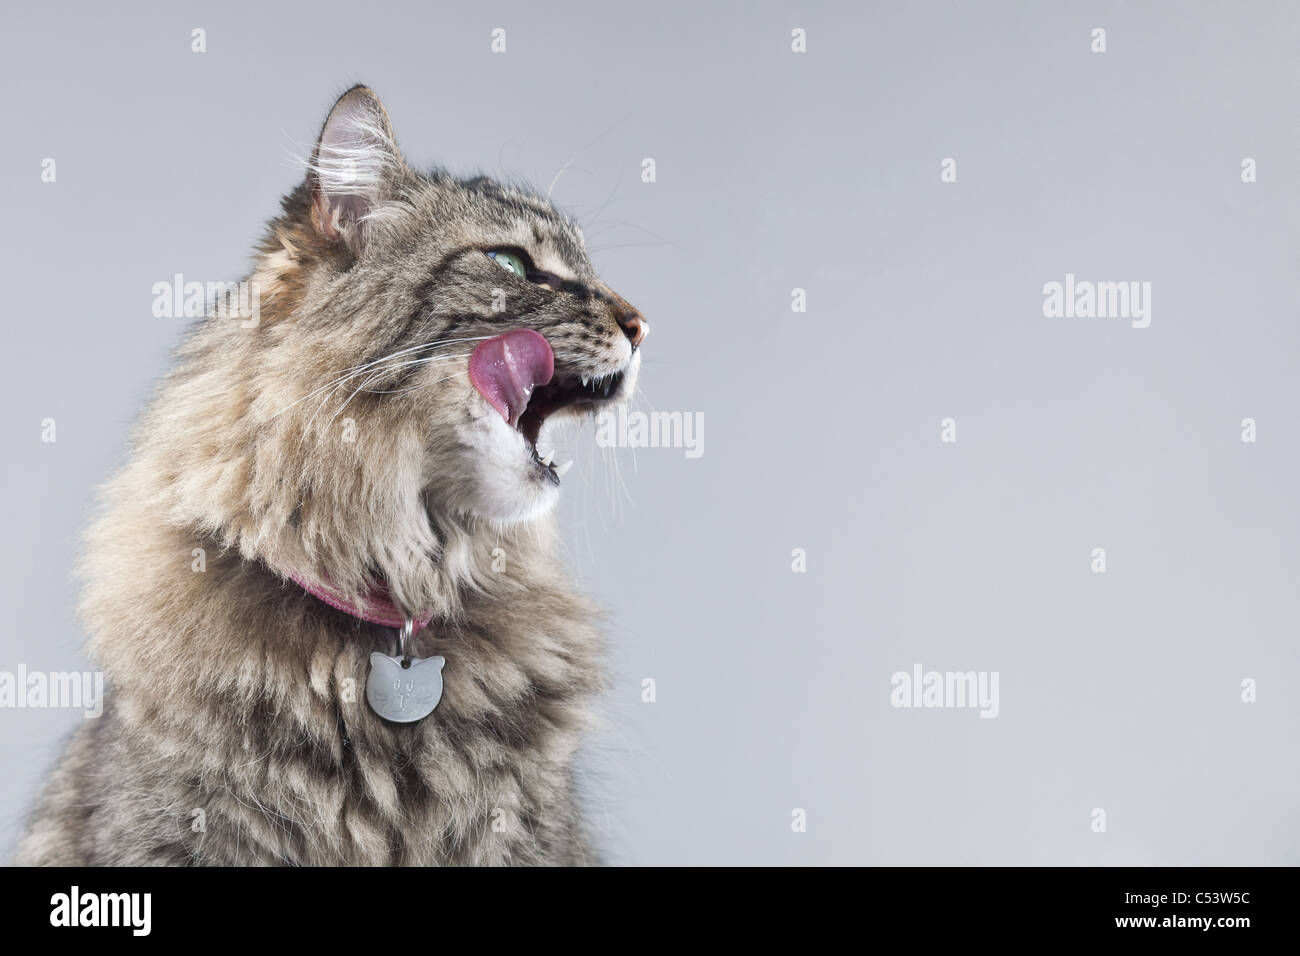 Tabby cat in profile against a gray background licks her lips, with a pink tongue sticking out. Stock Photo